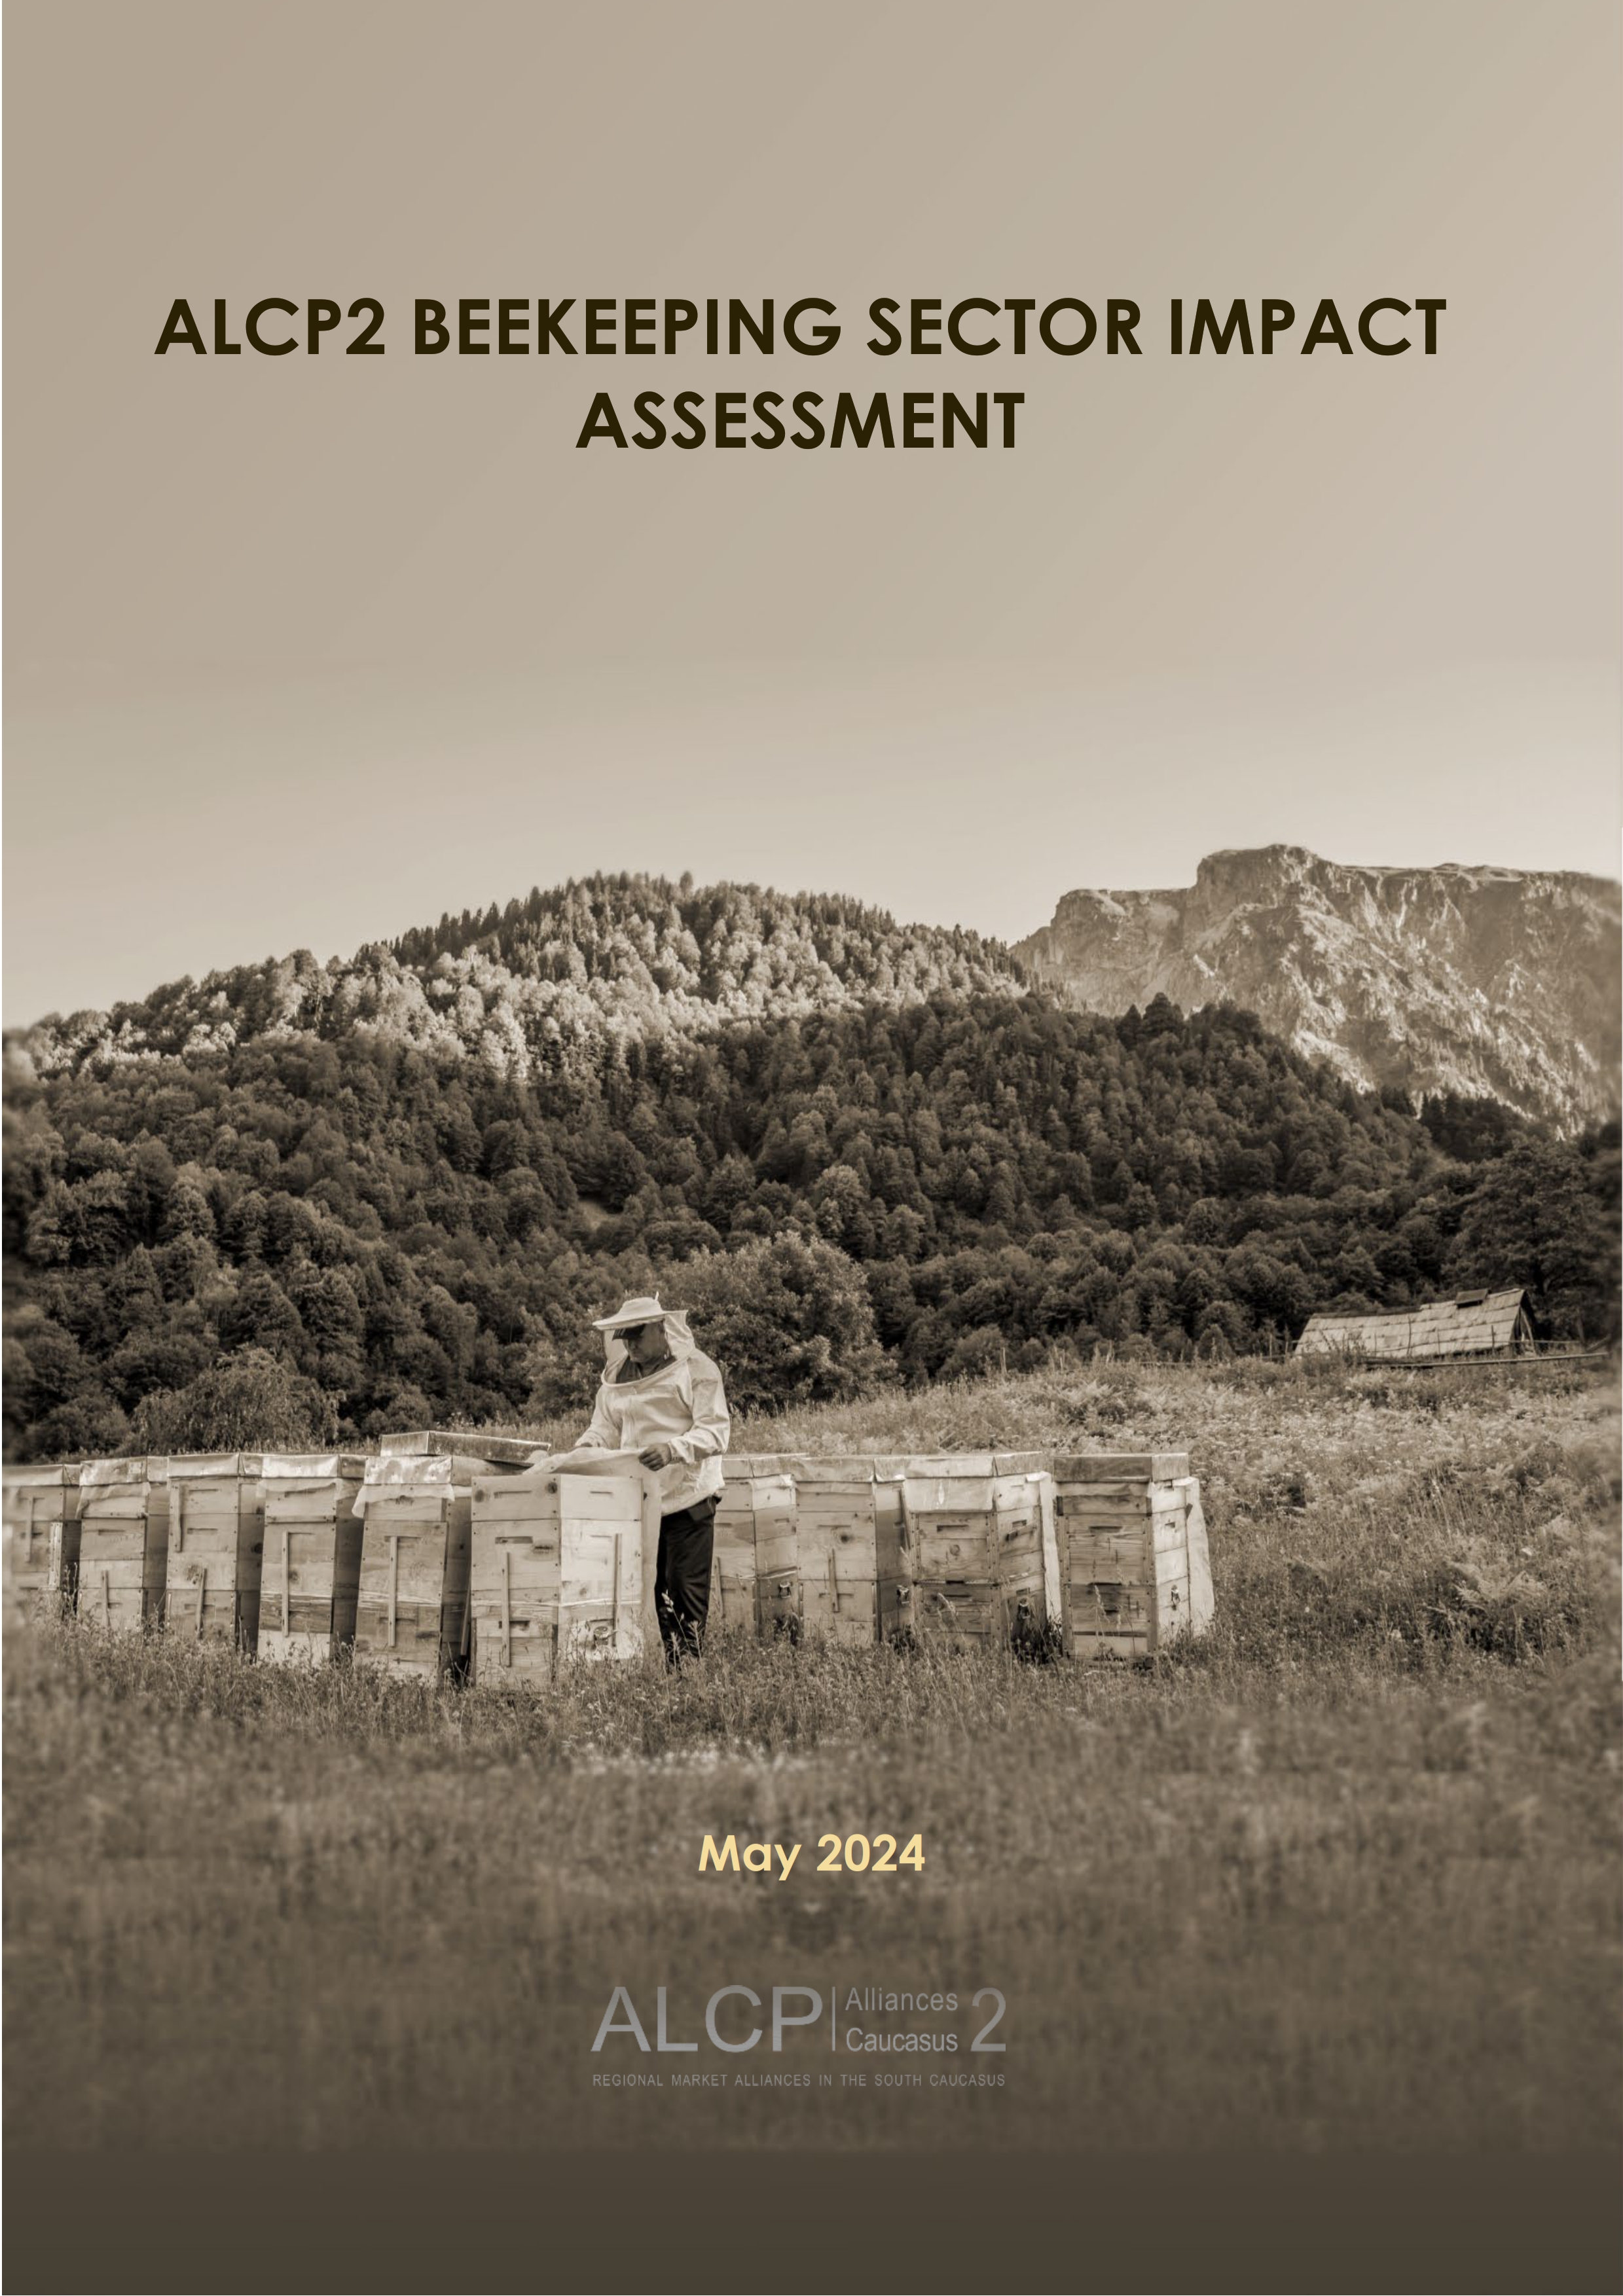 ALCP2 BEEKEEPING SECTOR IMPACT ASSESSMENT May 2024